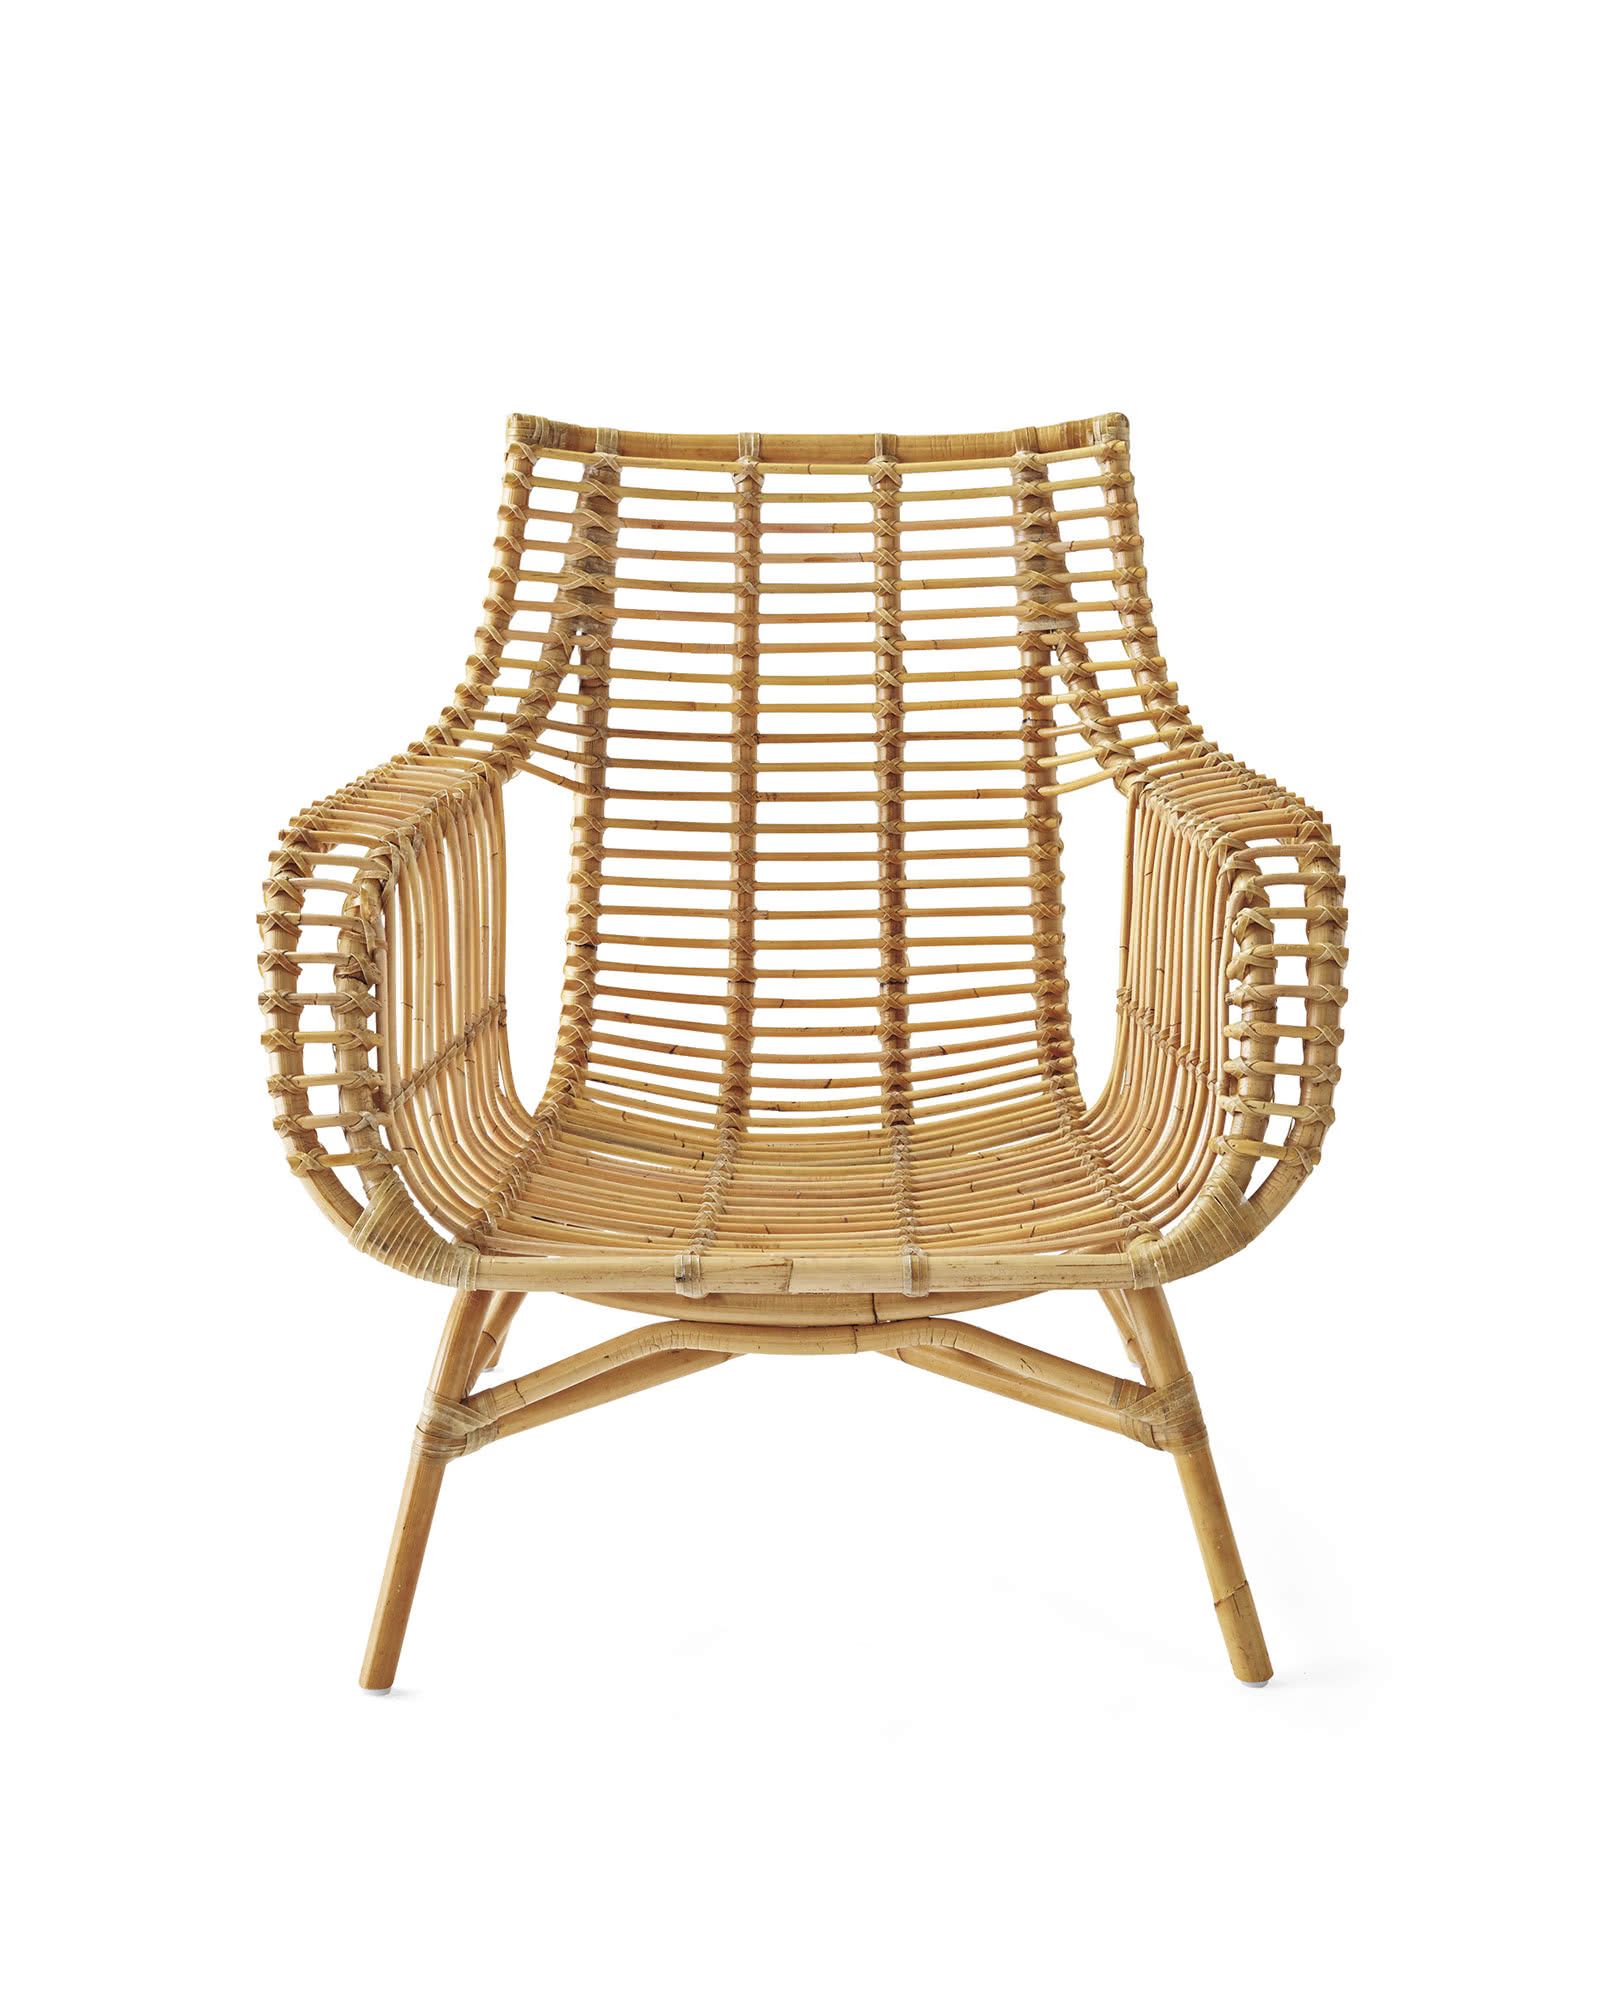 Venice Rattan Chair
        CH160-01 | Serena and Lily